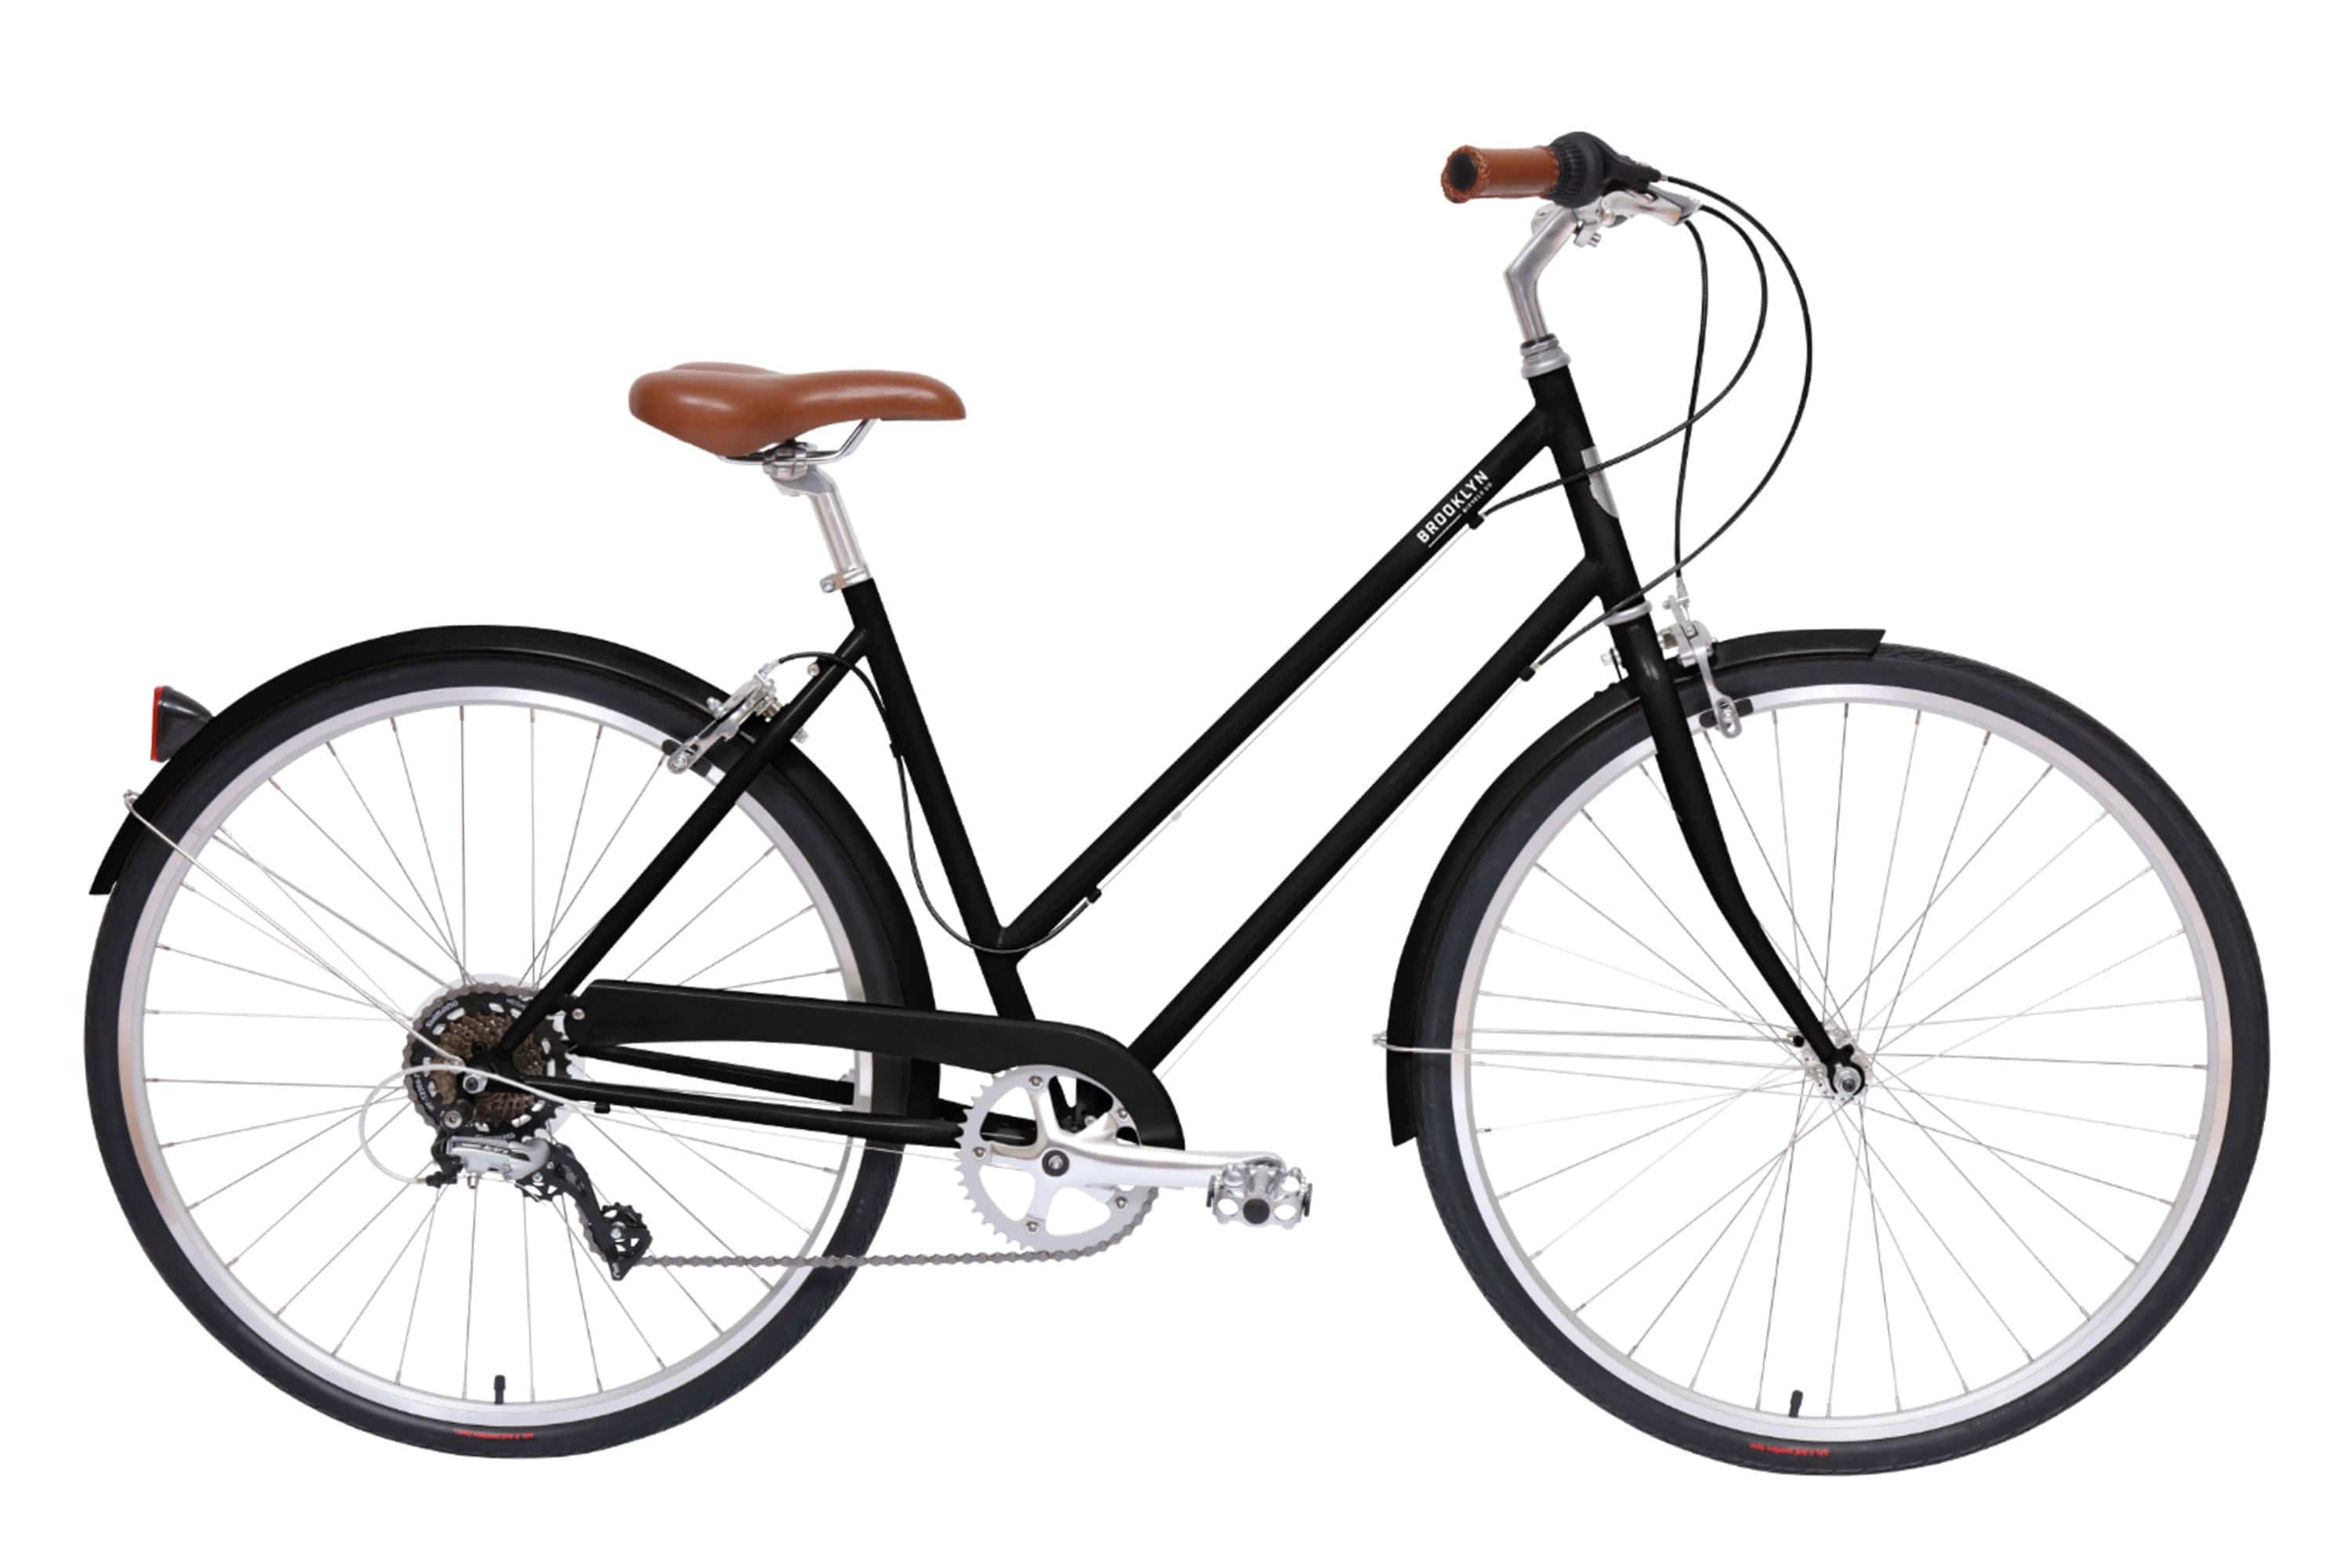 Franklin 8 Speed 8 Speed Step Through Bicycle | Franklin Eight City Cruiser  Gloss Black / S/M 8D-FRA-GB-M